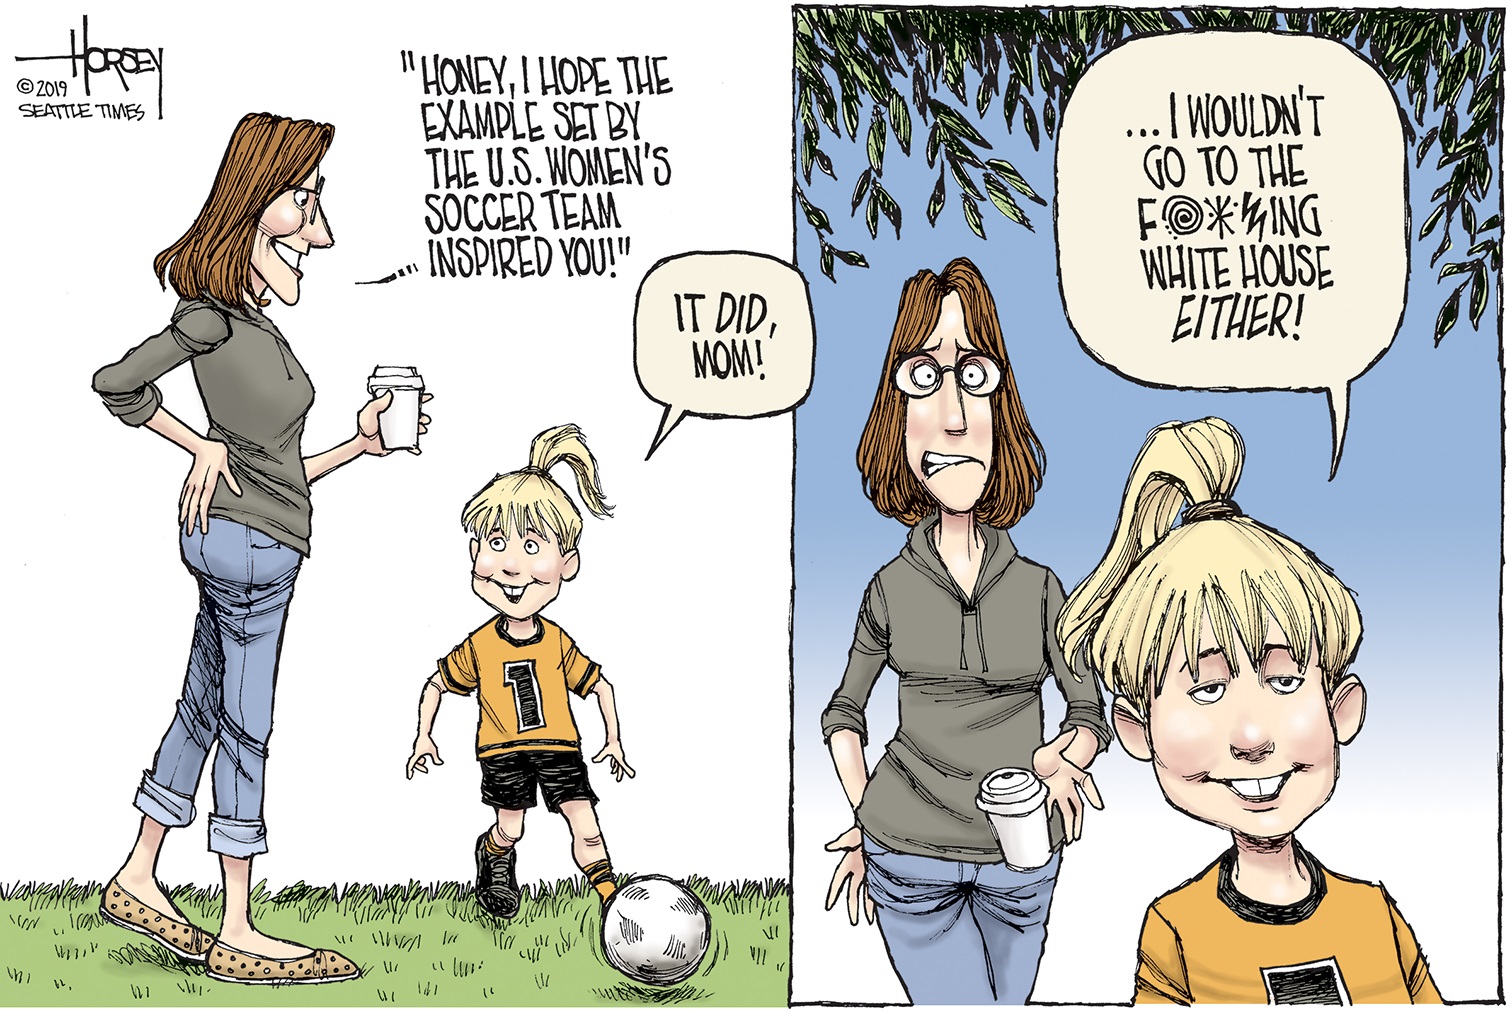 Editorial cartoons for July 14, 2019 Womens soccer, Jeffrey Epstein, divided Democrats